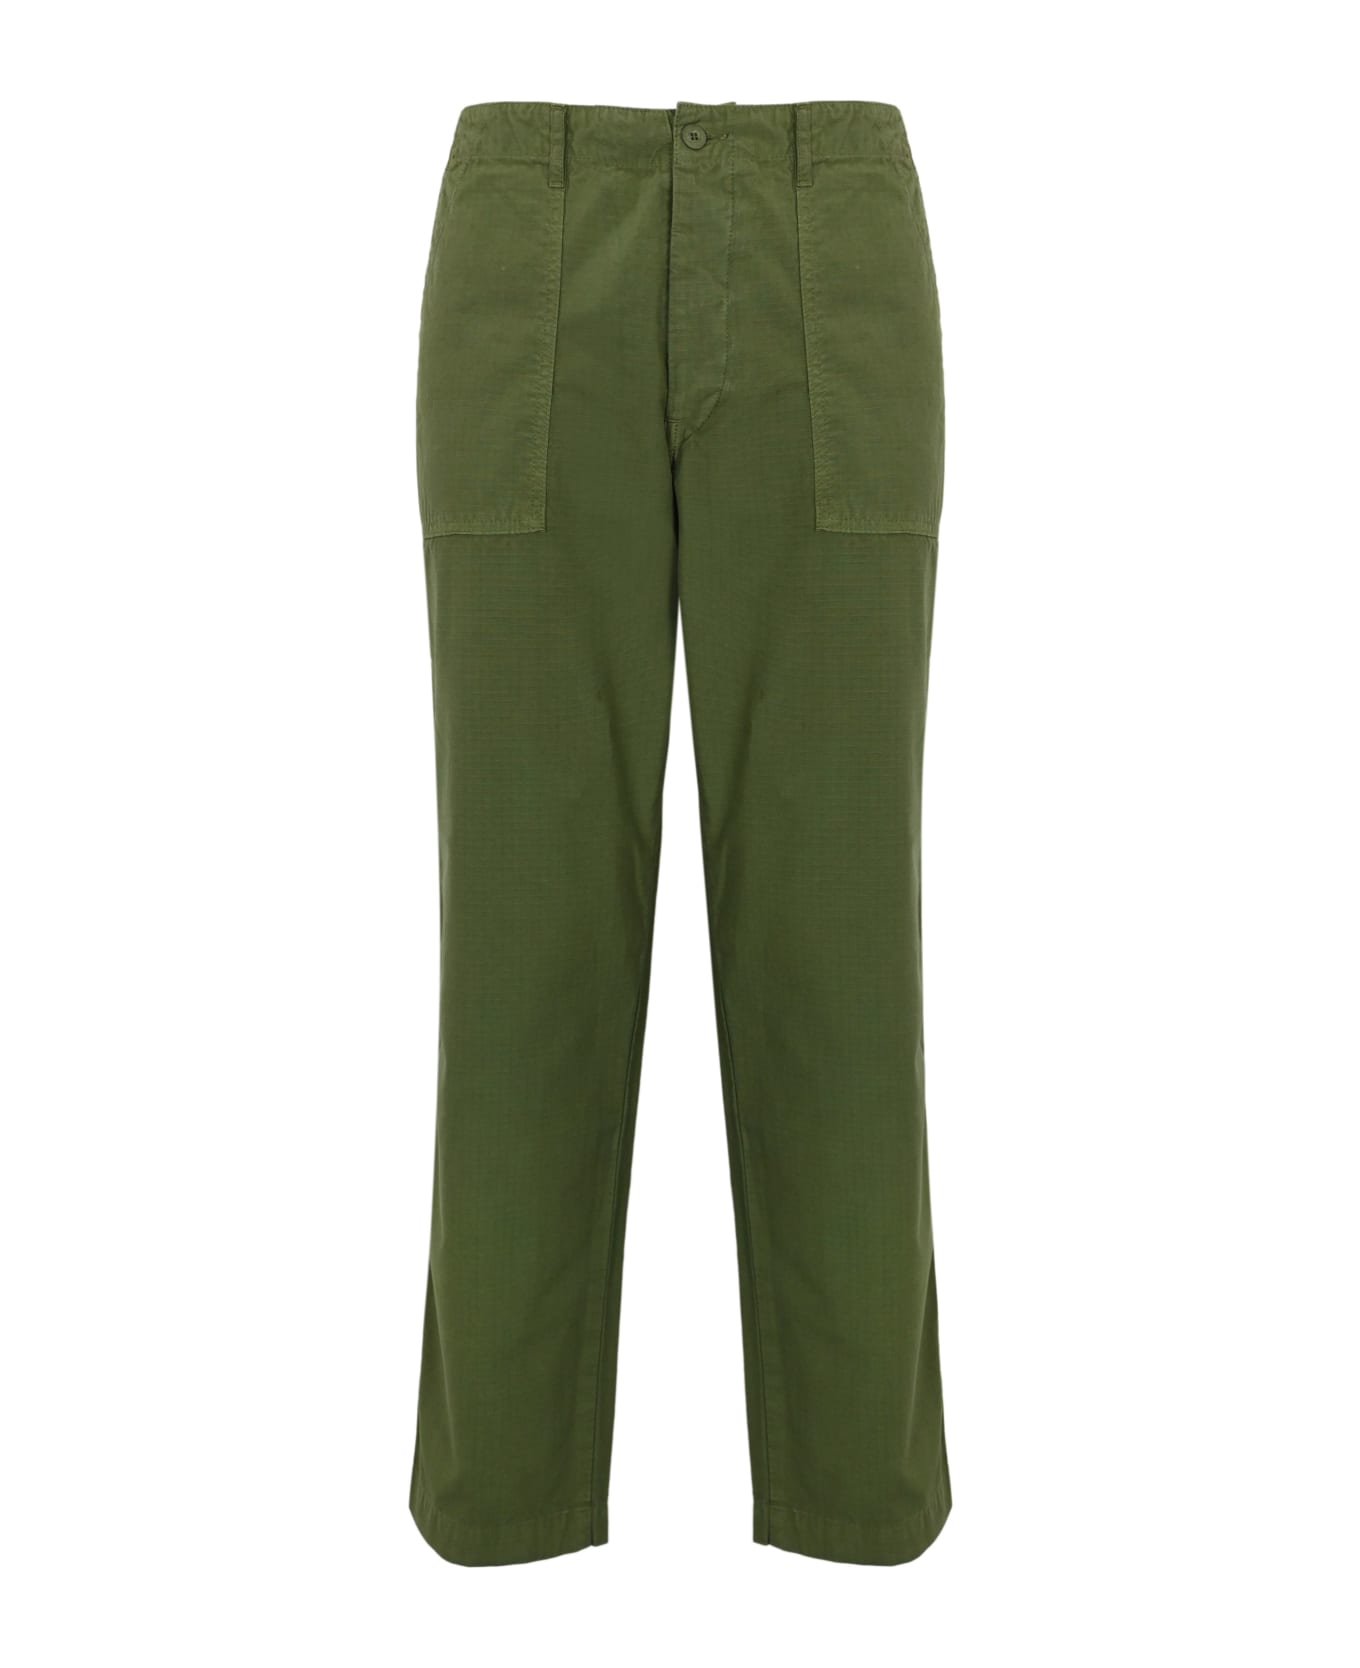 Roy Rogers Trousers With Big Pockets And Patches - Green